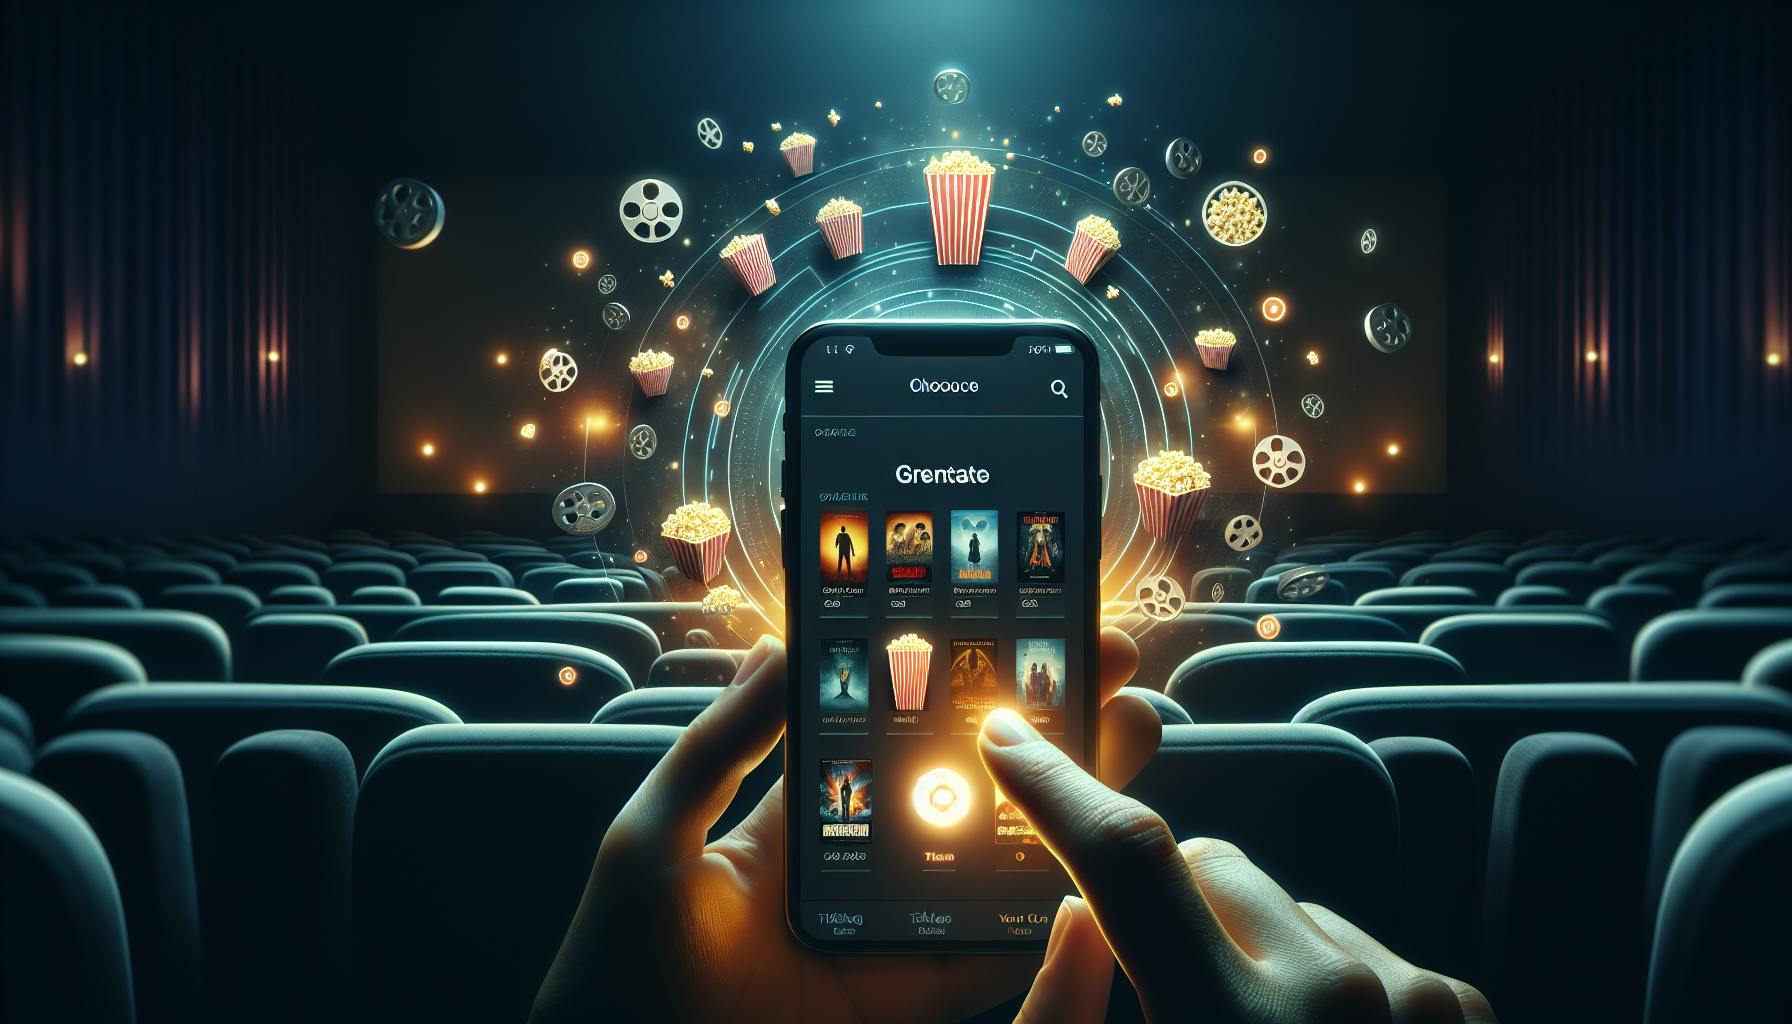 Design a Mobile Ticketing App for a Movie Theater: User Experience Focus